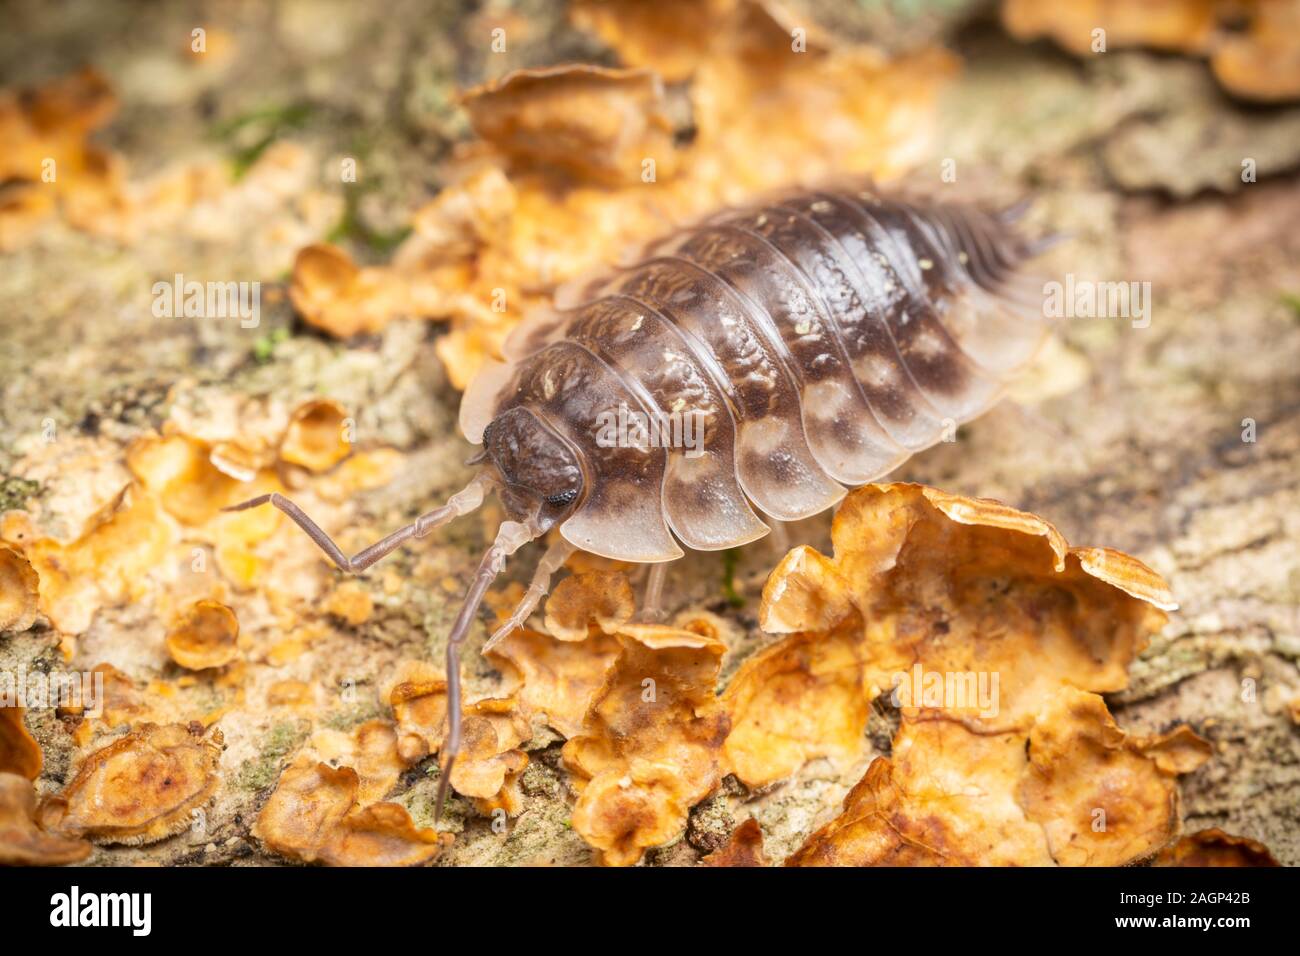 A Common Shiny Woodlouse (Oniscus asellus) moves across the surface of a fungus covered log. Stock Photo